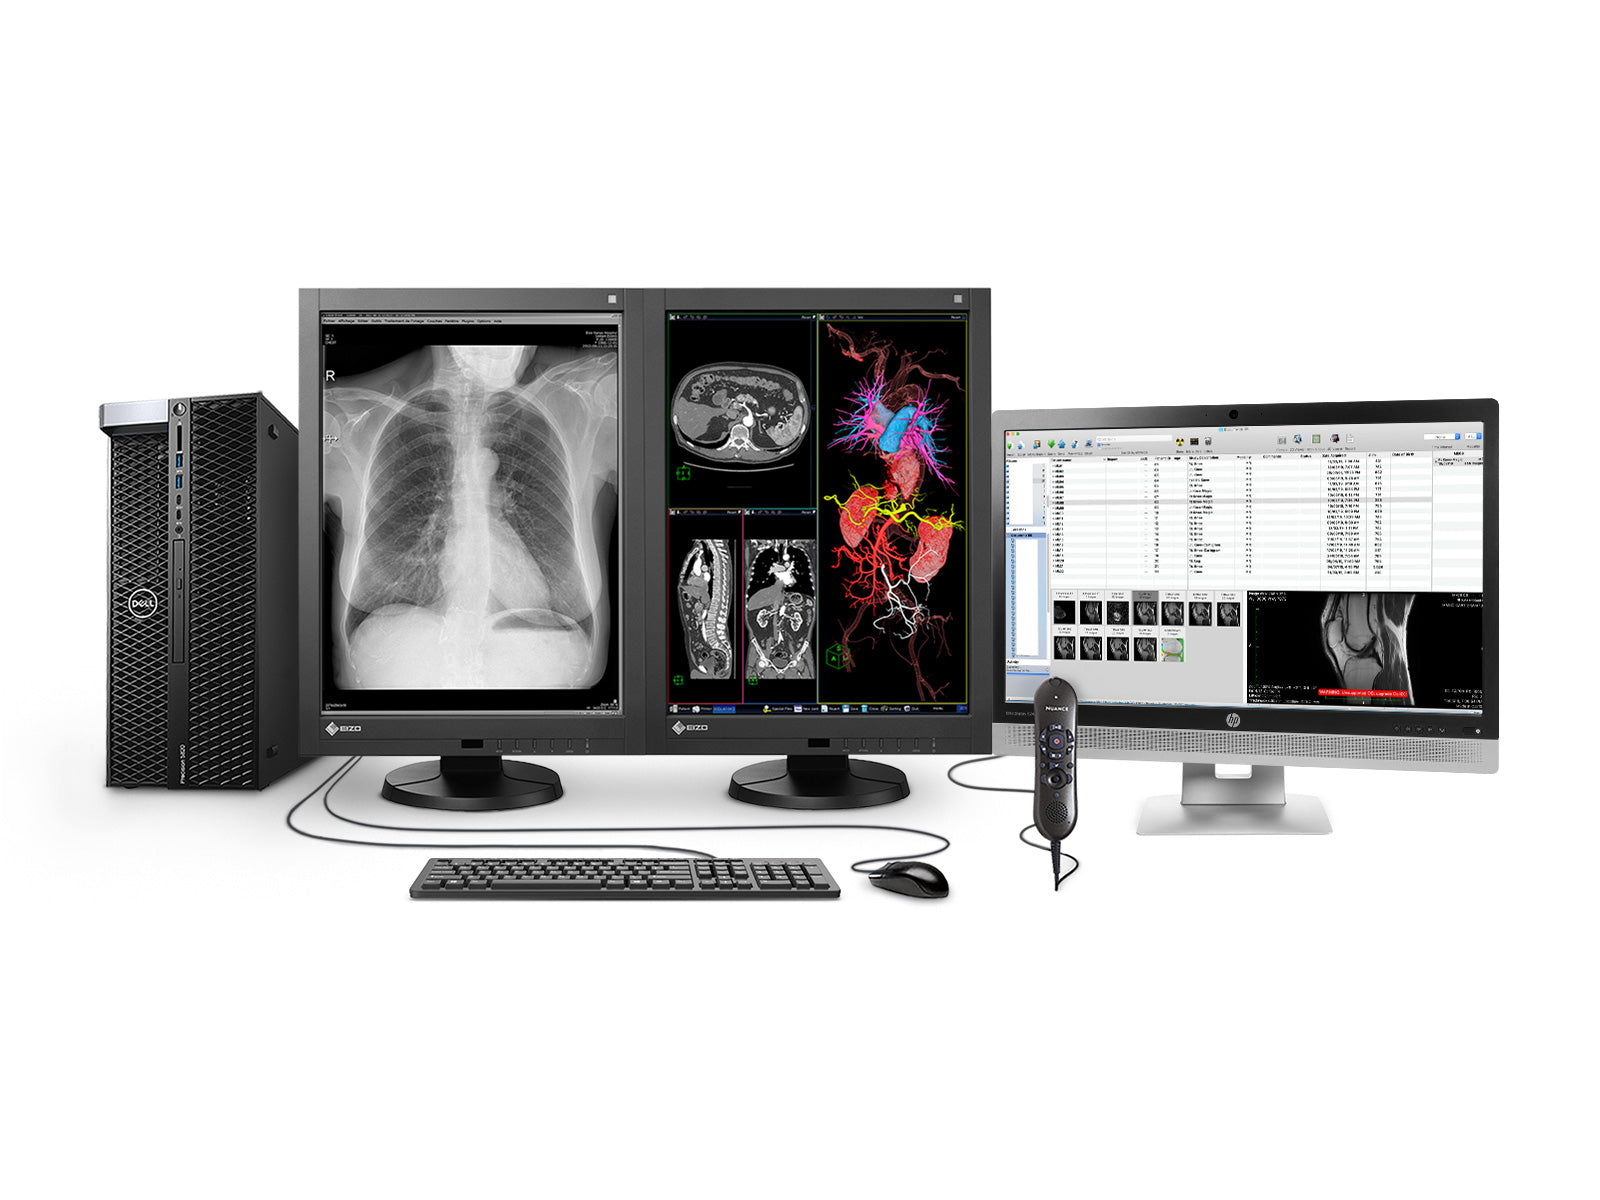 Complete PACS General Radiology Station | Eizo 3MP Color LED Displays | Dell Workstation | Dictation Mic | Worklist Monitor (RX340T5820R)